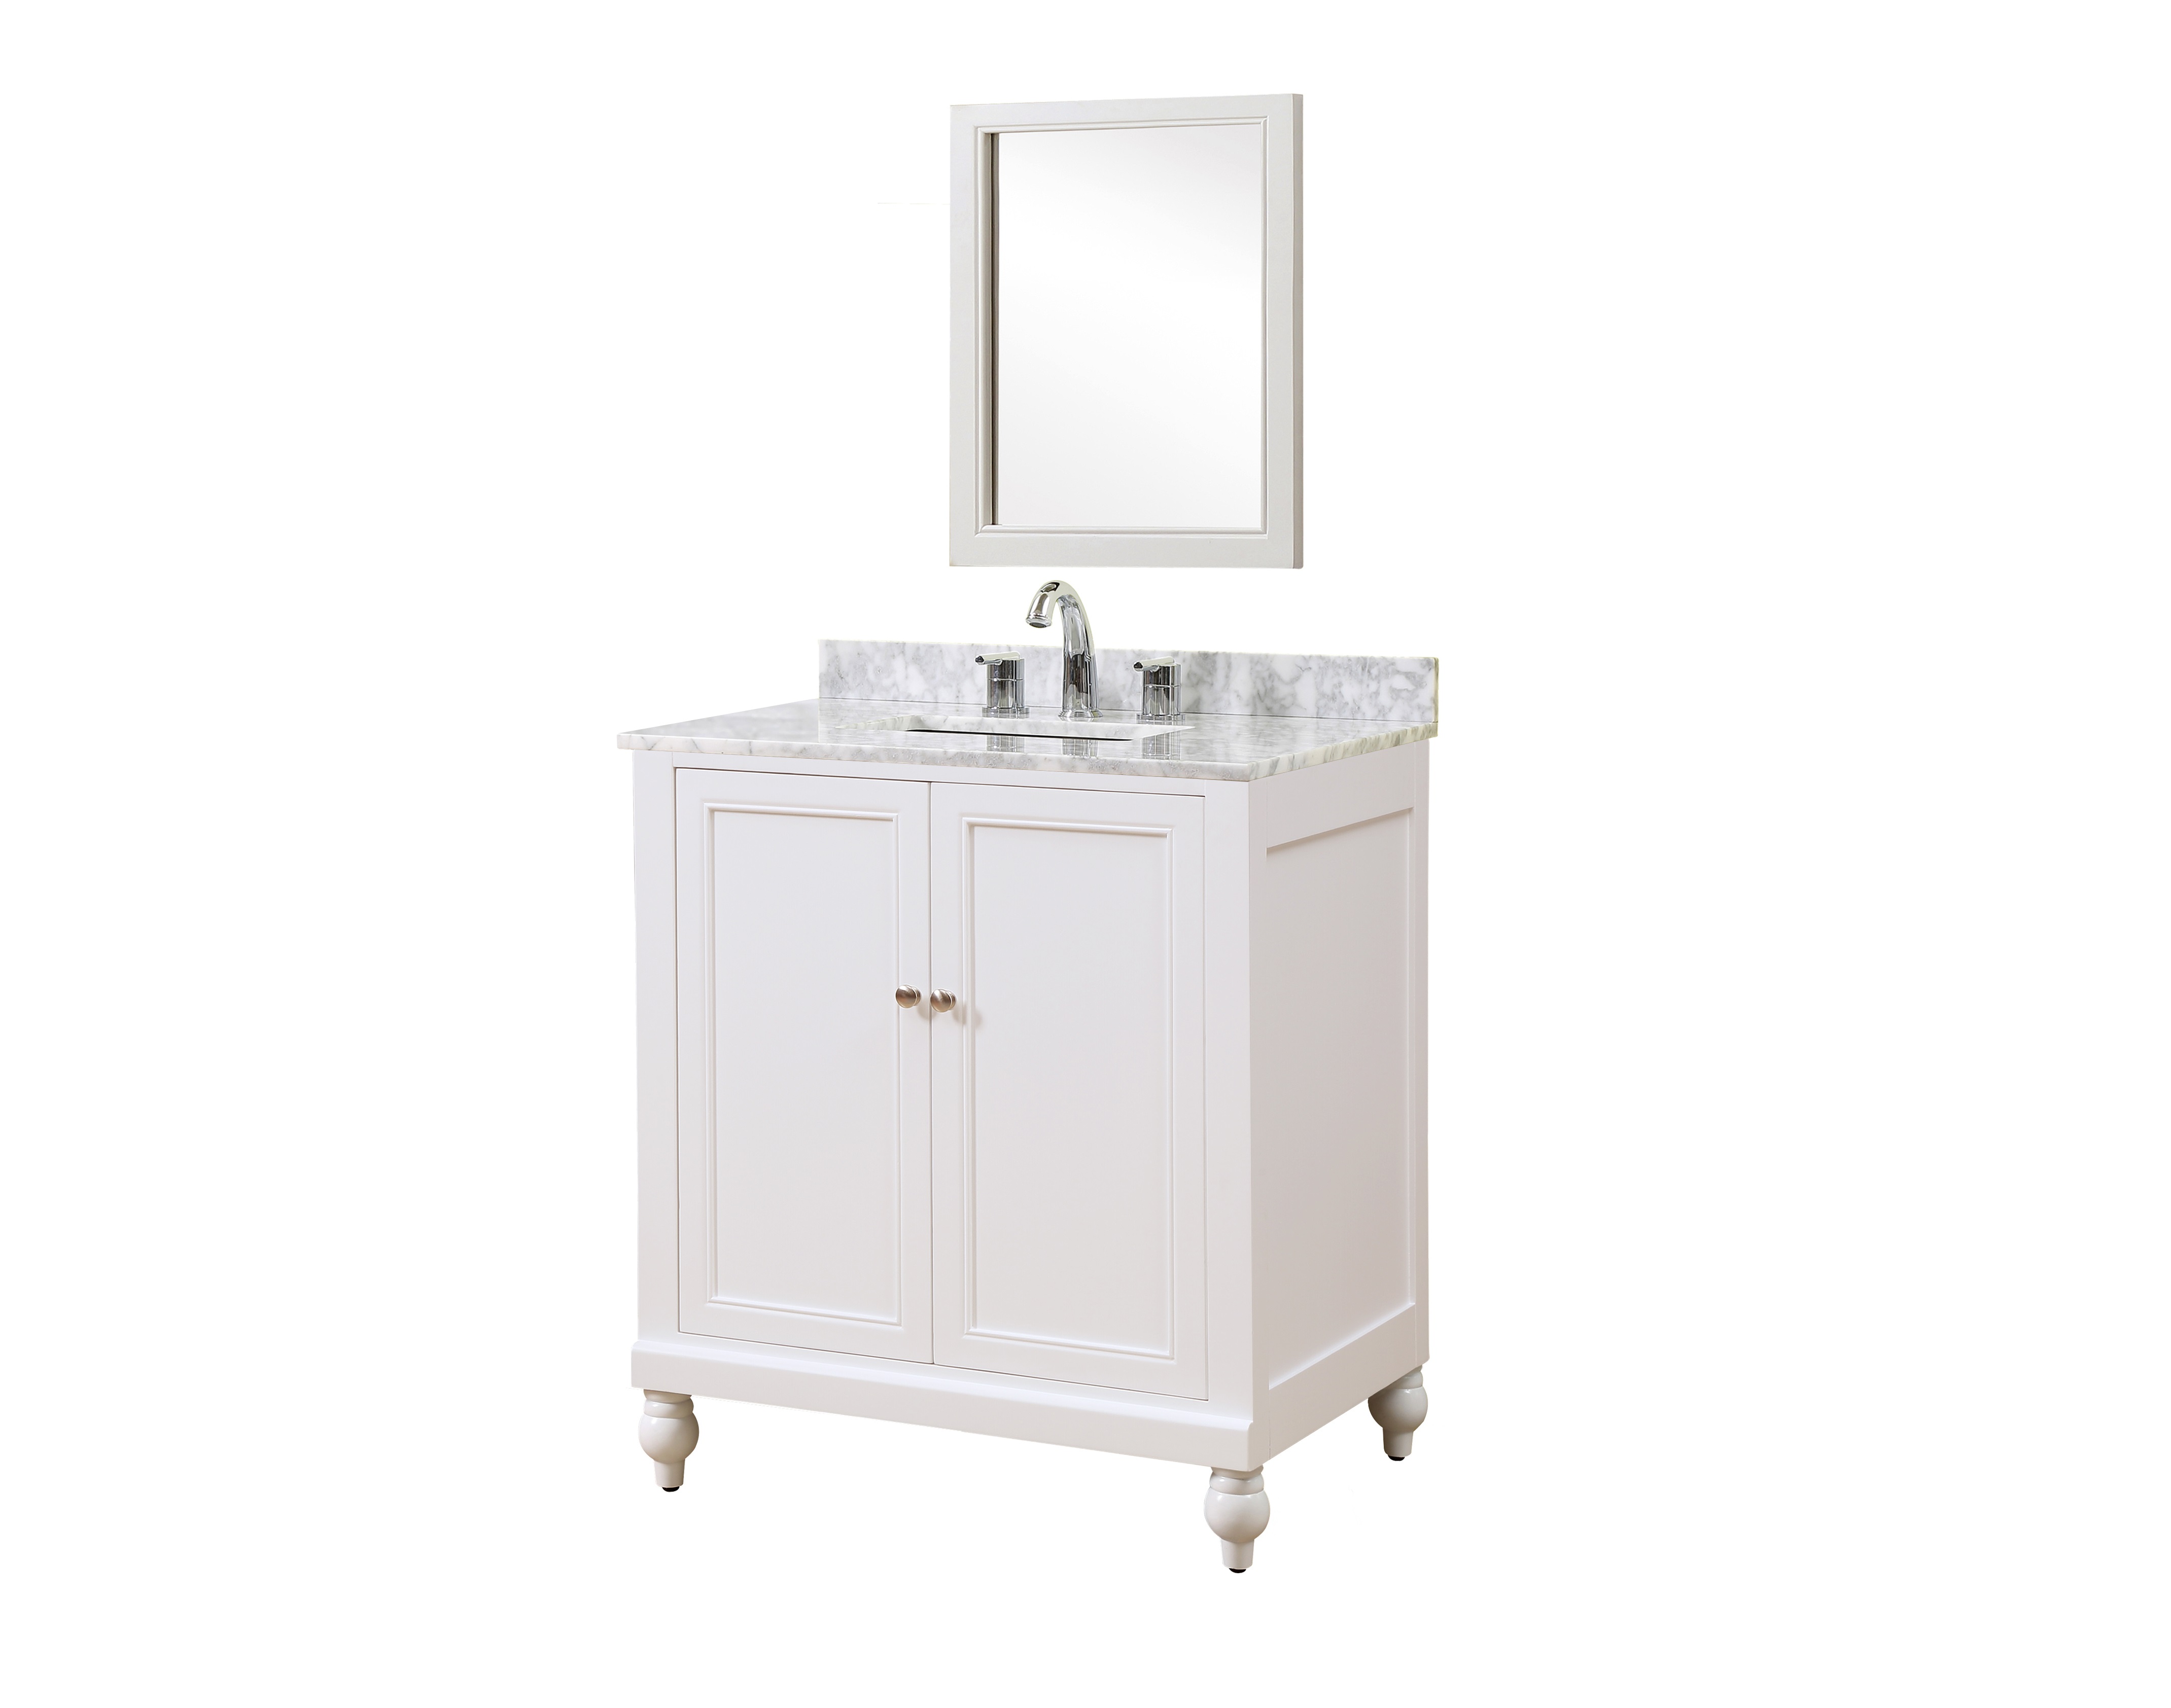 32" Pearl White Vanity with White Carrara Marble Top 